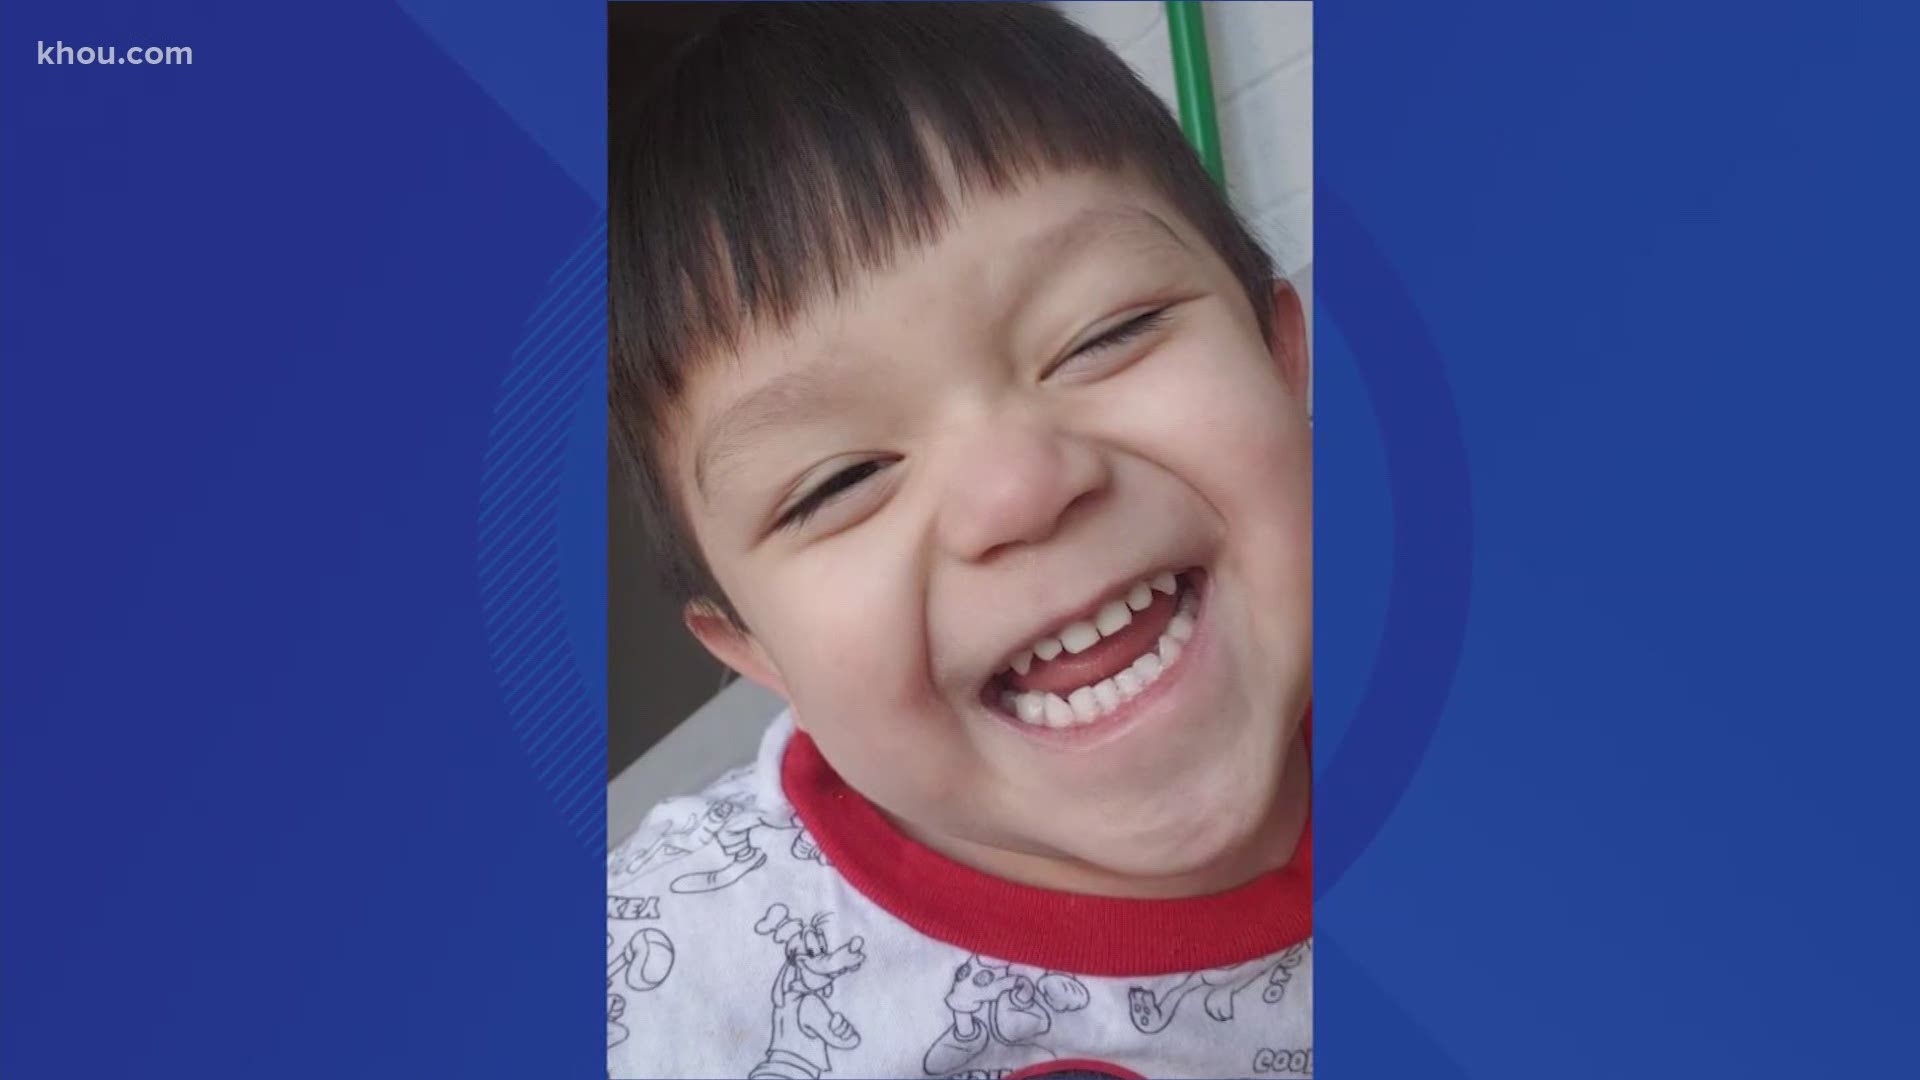 3-year-old Elijah was hit when his mother's boyfriend started shooting during an argument Friday night at a residence in southeast Houston.